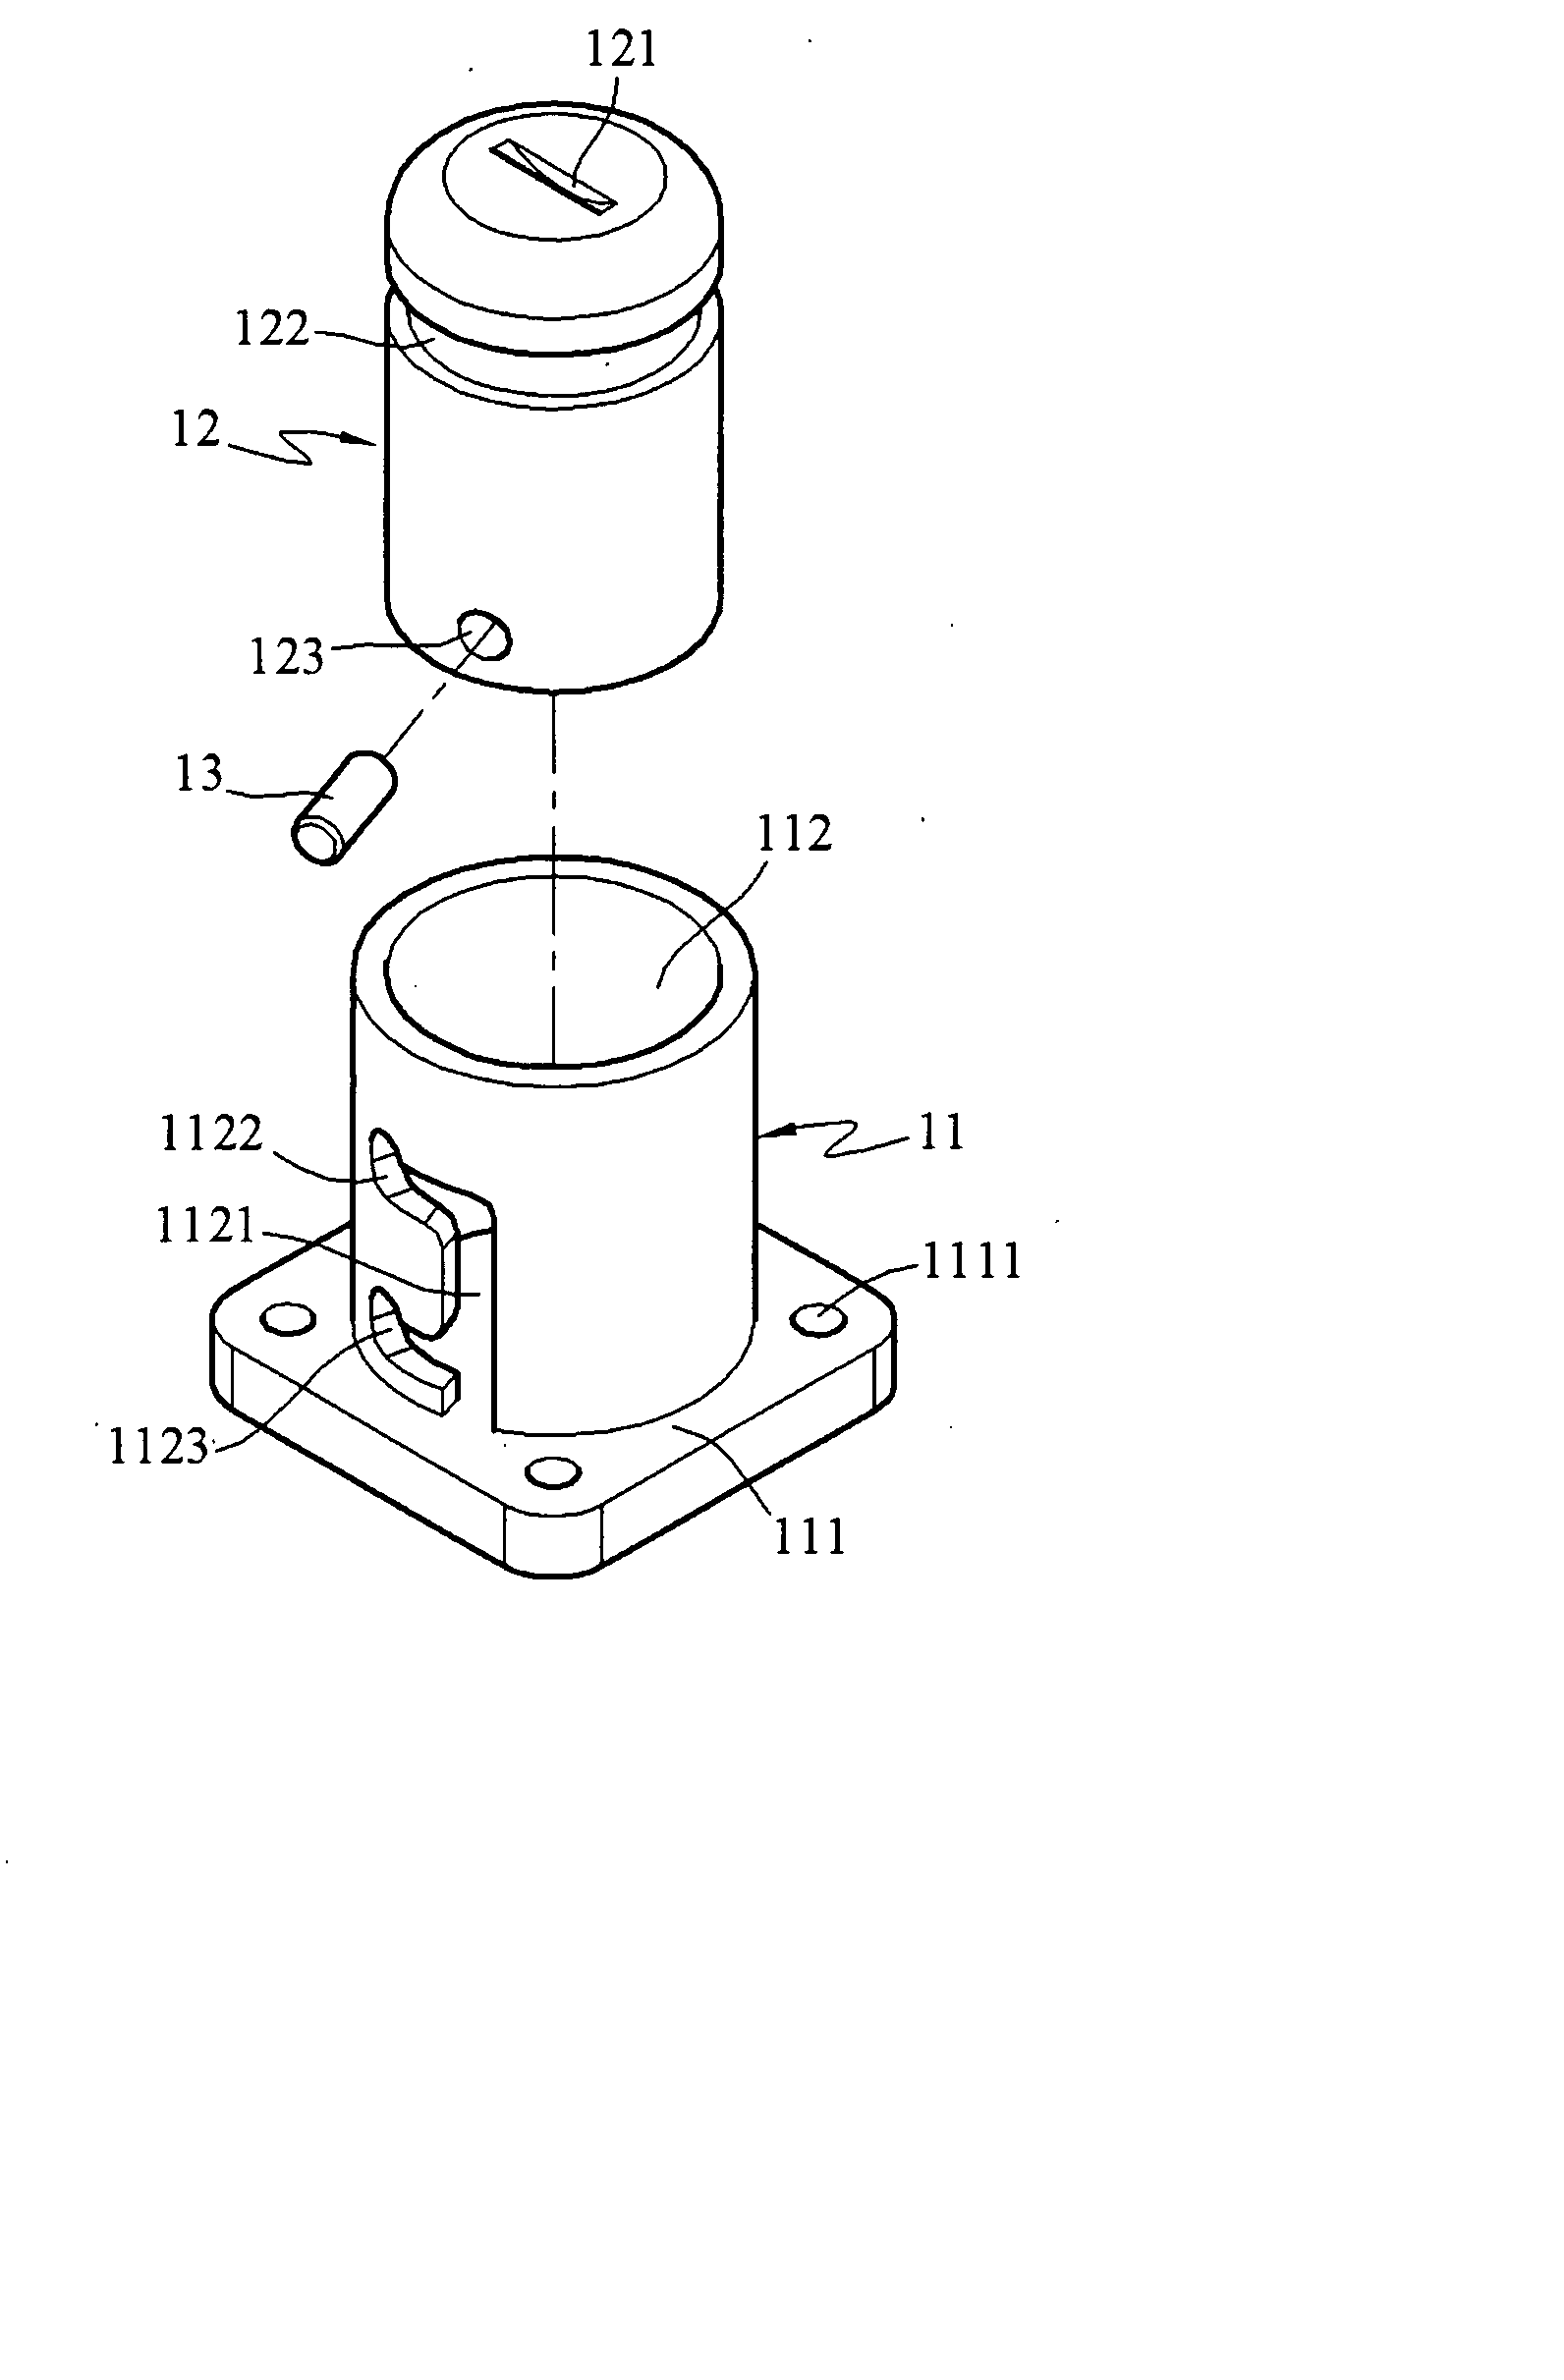 Electronic device hanging mechanism